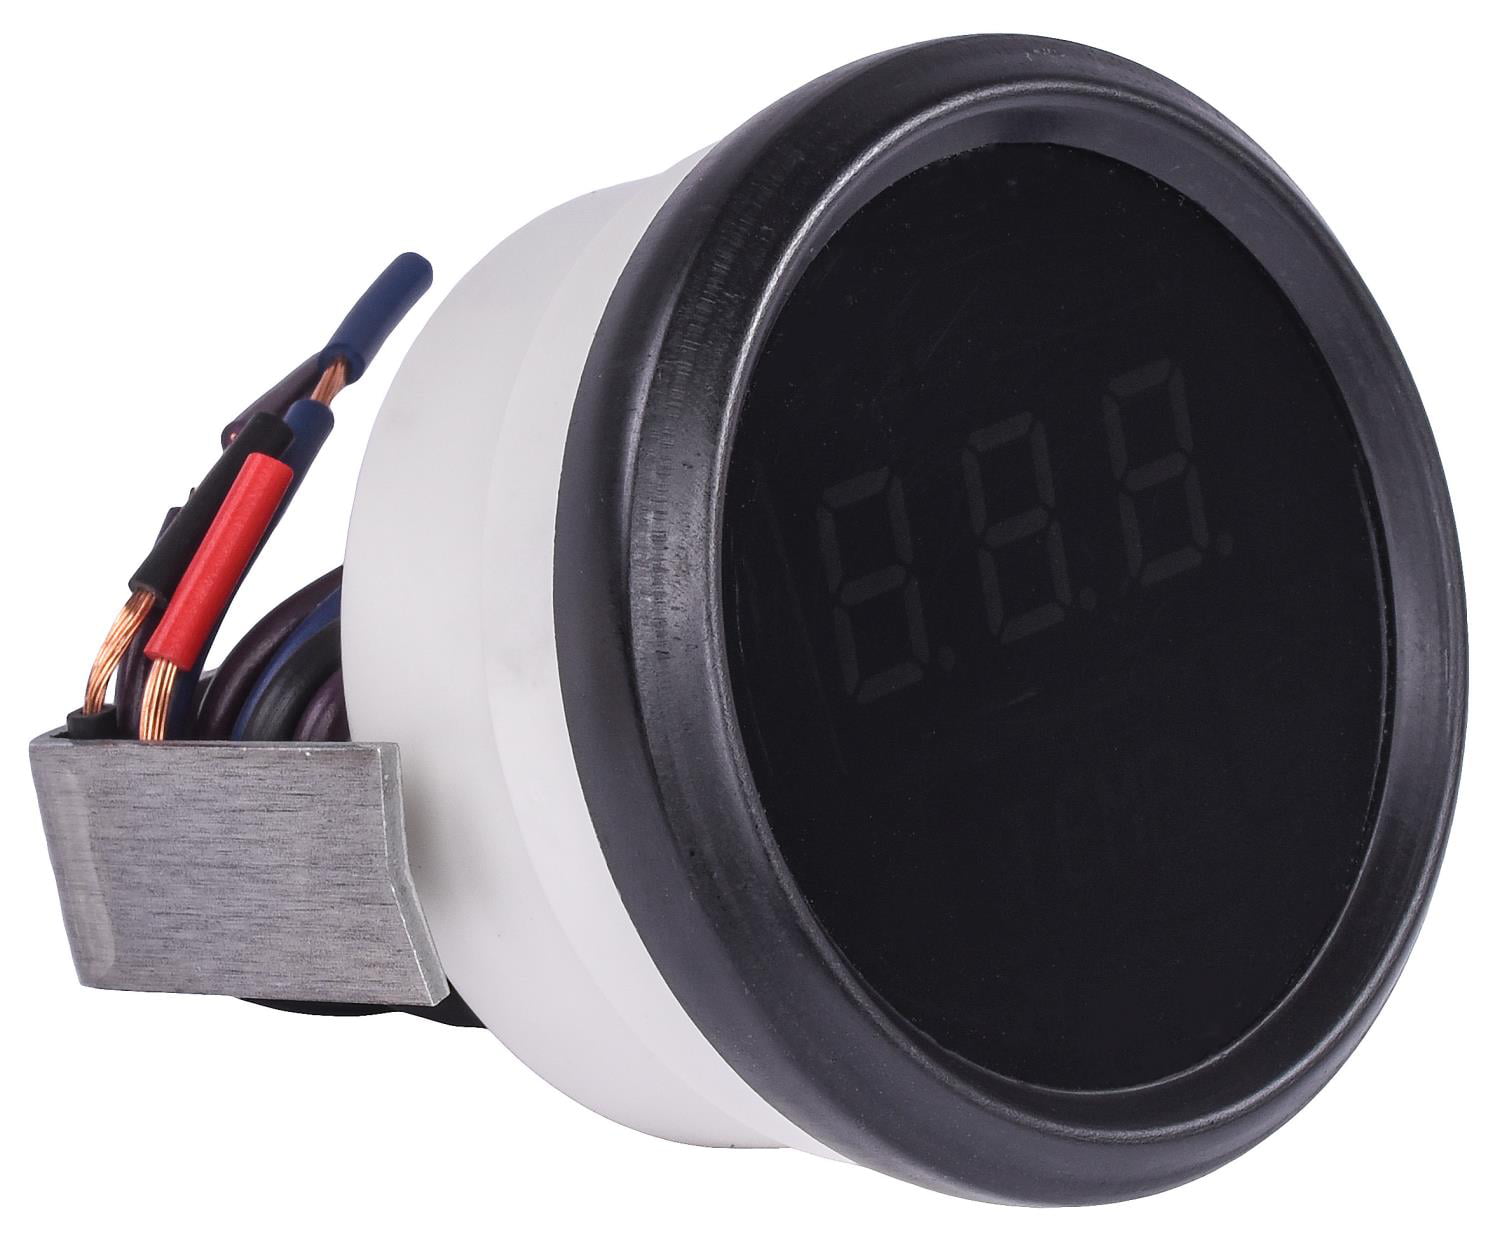 JEGS 41444 Water Temperature Gauge LED Digital 18-225 Degrees F 2 1/16 in. Diame